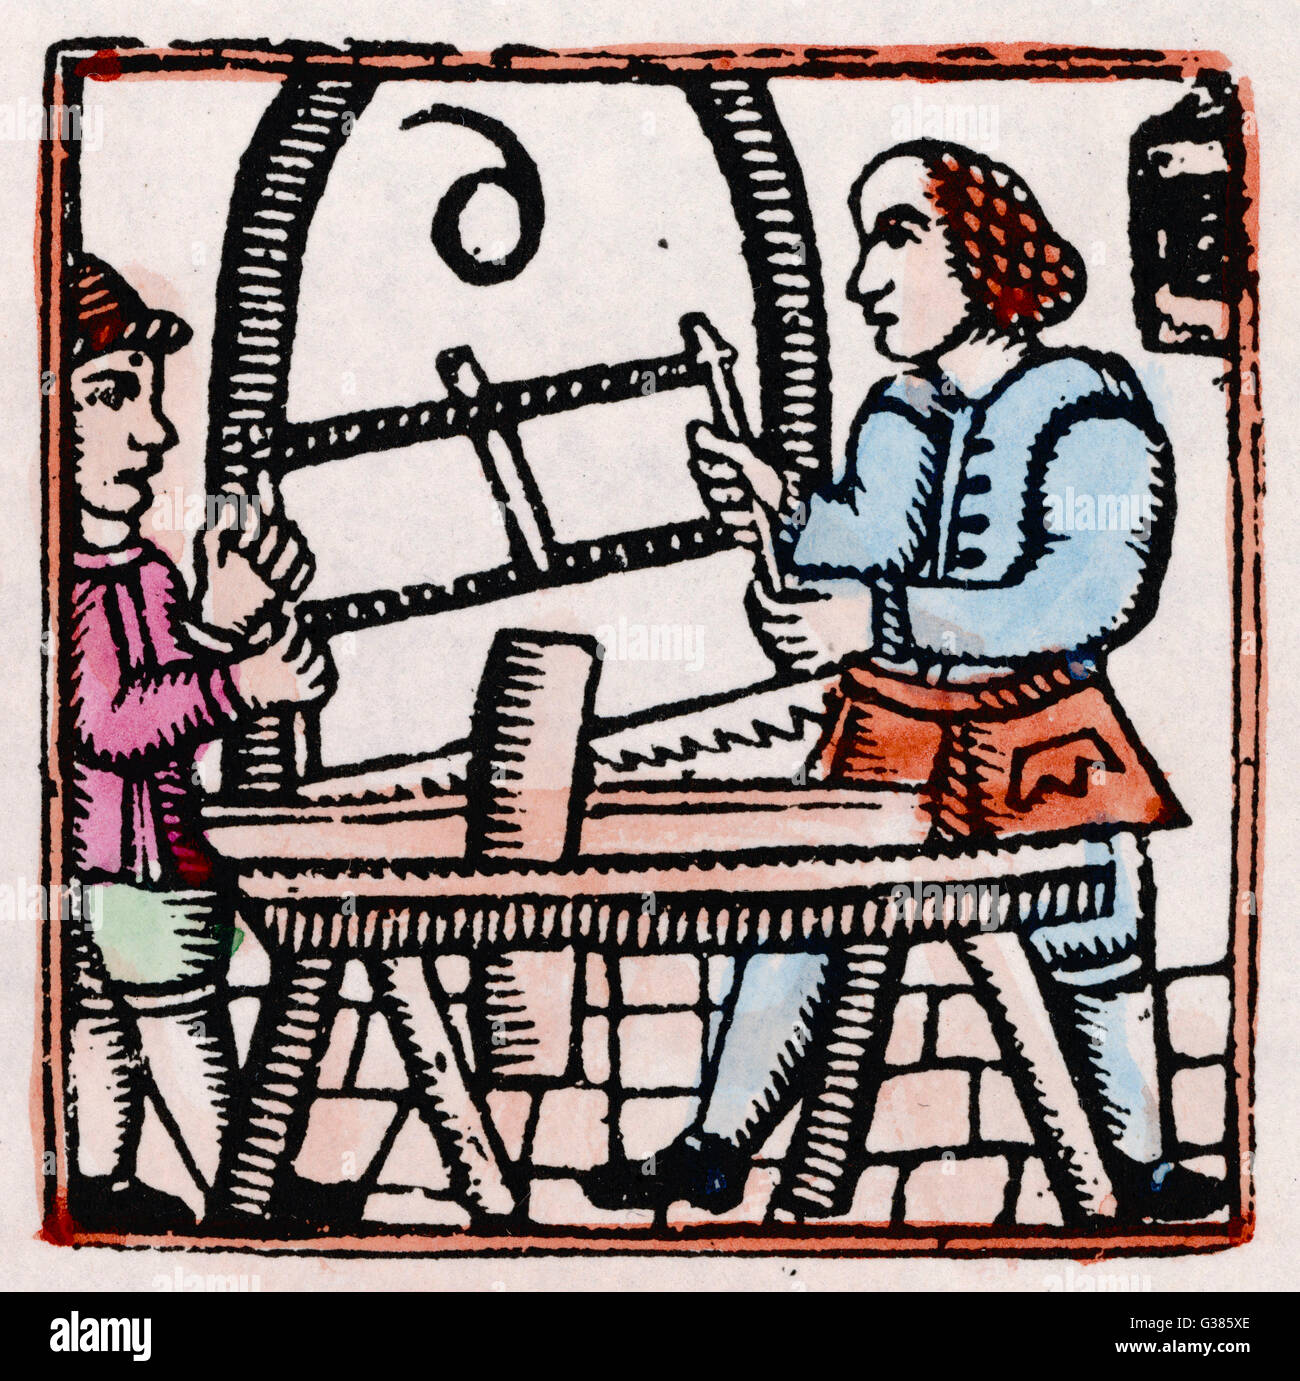 17th century Woodworkers - Woodcut Stock Photo